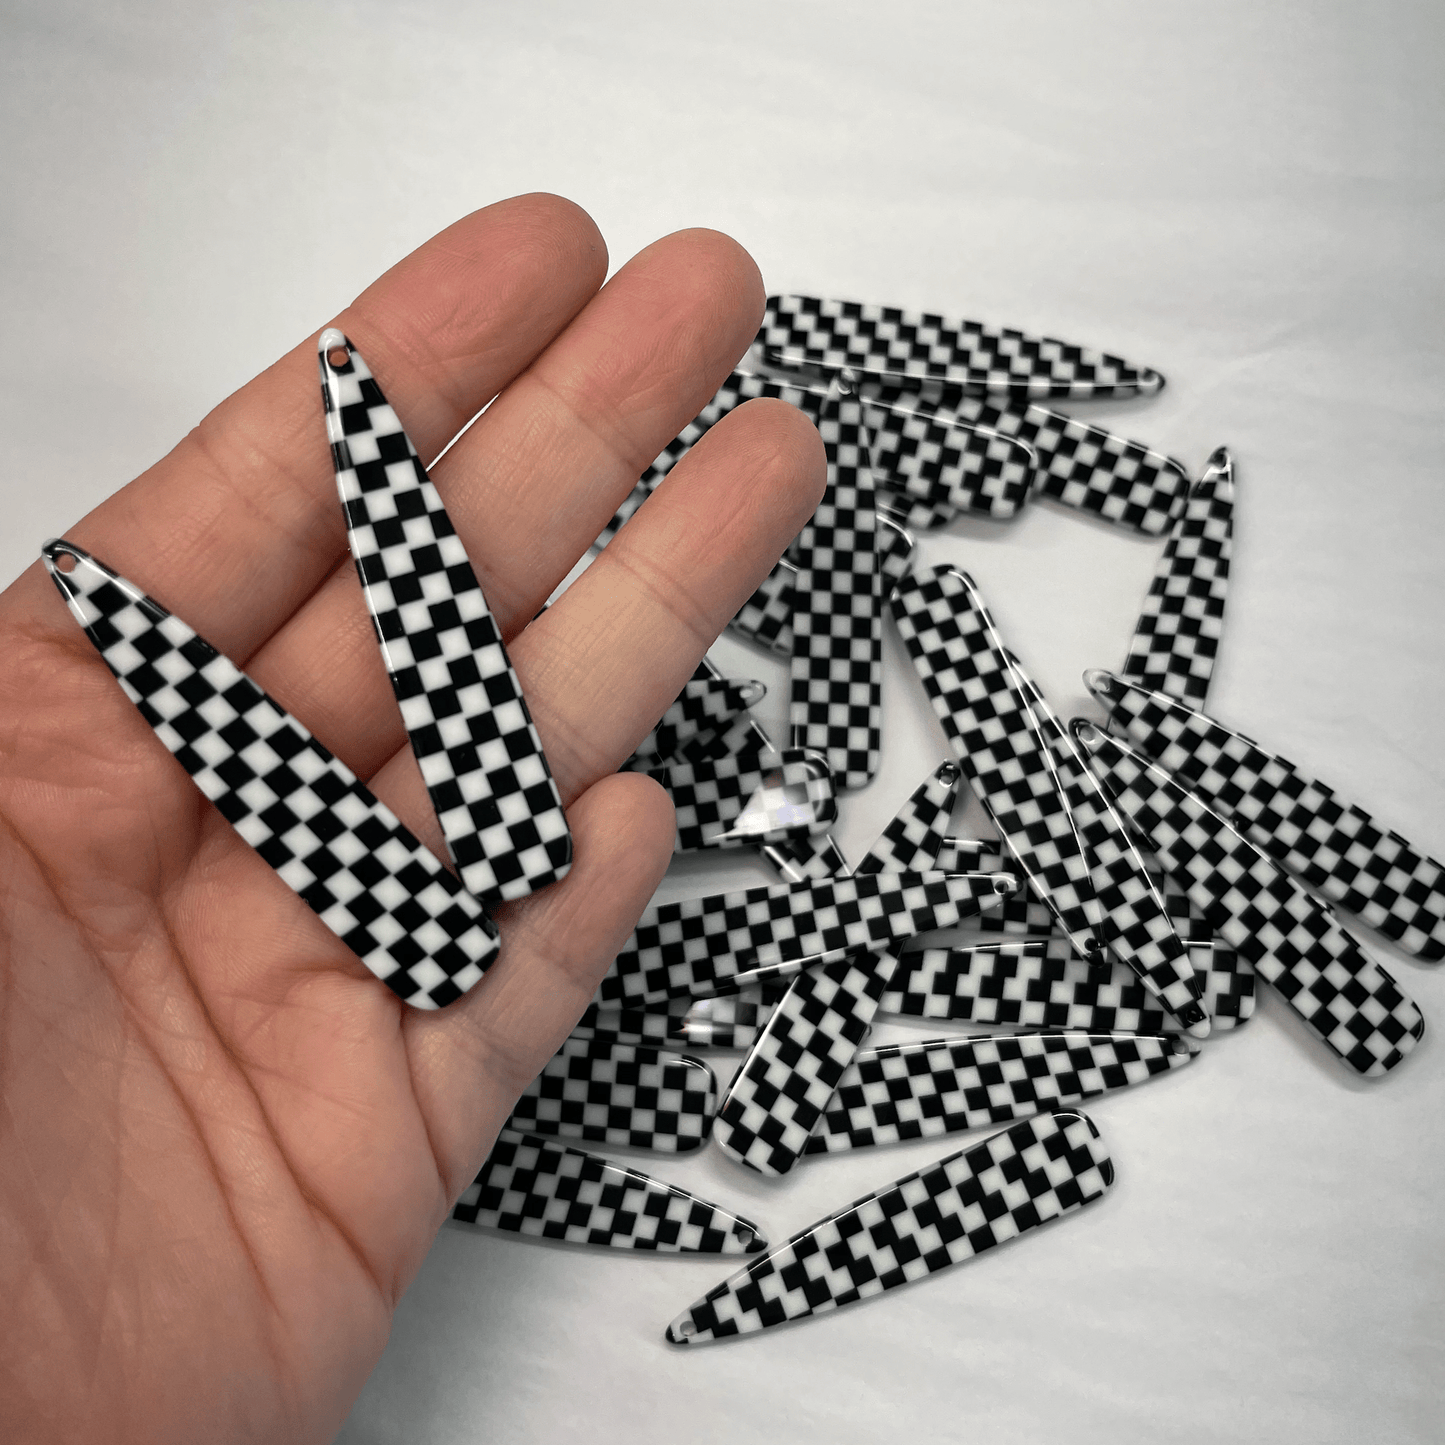 Sundaylace Creations & Bling Resin Gems 11*55mm Black and White Checkered Long Teardrop, one hole sew on, Resin Gems